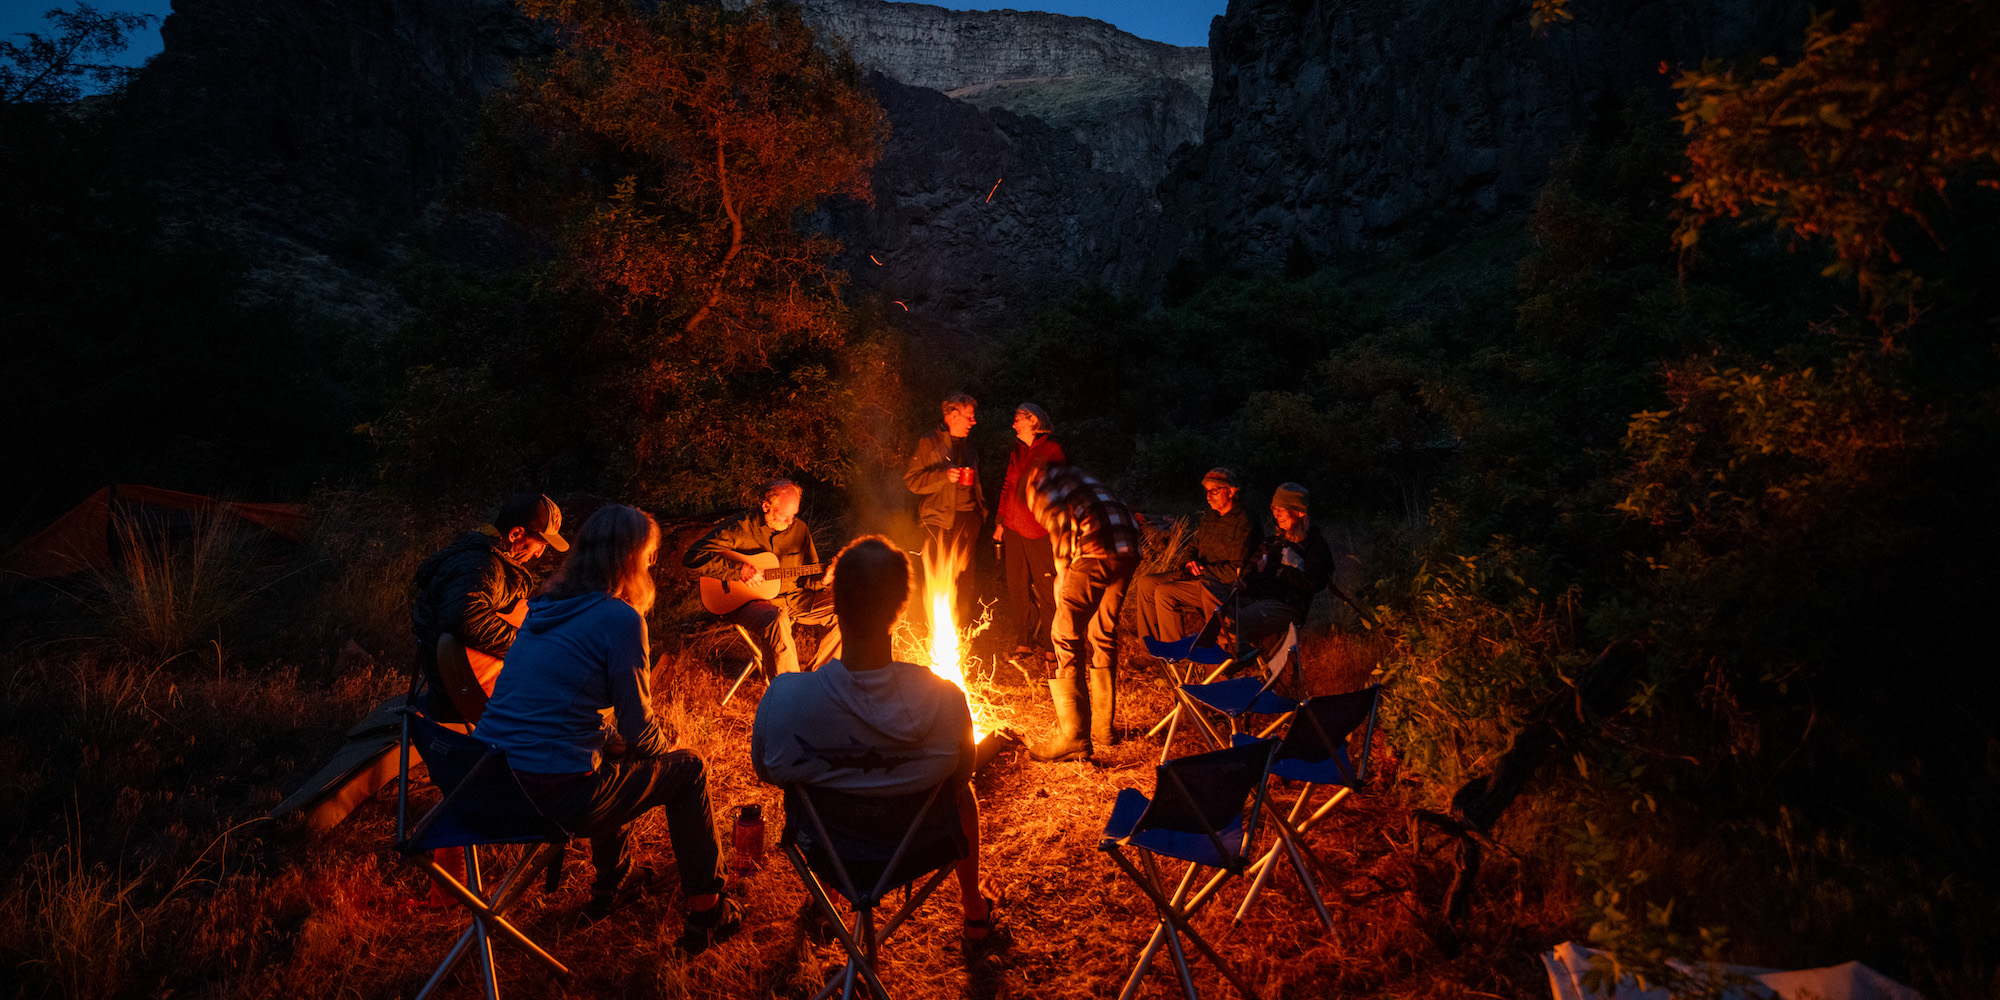 A group of people sitting around a campfire in Idaho talking amongst one another while one person plays guitar.